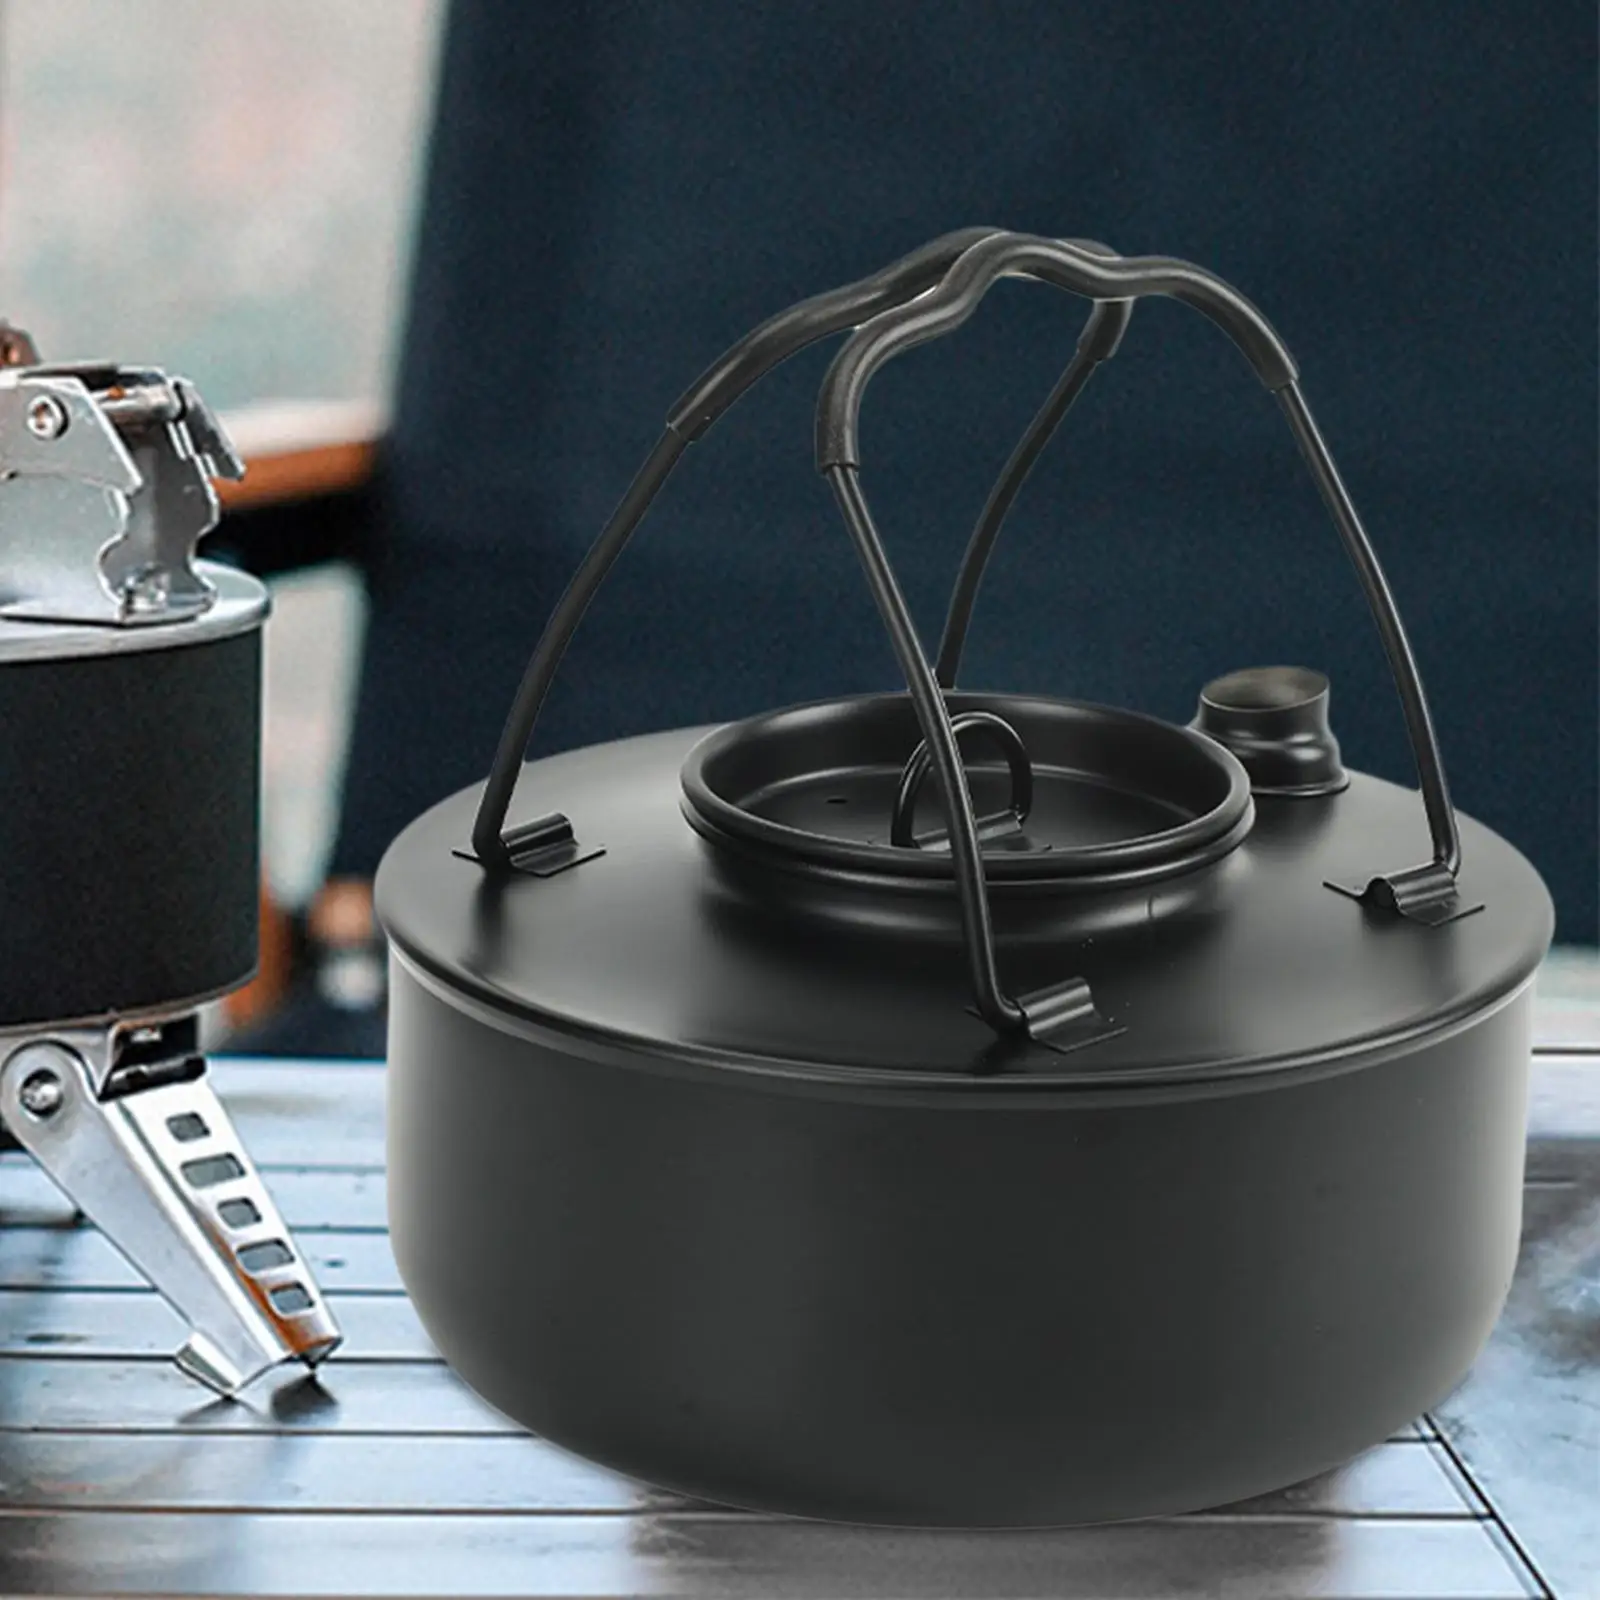 Camping Kettle Teapot Hiking Teakettle 1.5L Water Boiler Barbecue Camp Outdoor Stove Pot for Boiling Water Kitchen Over Fire